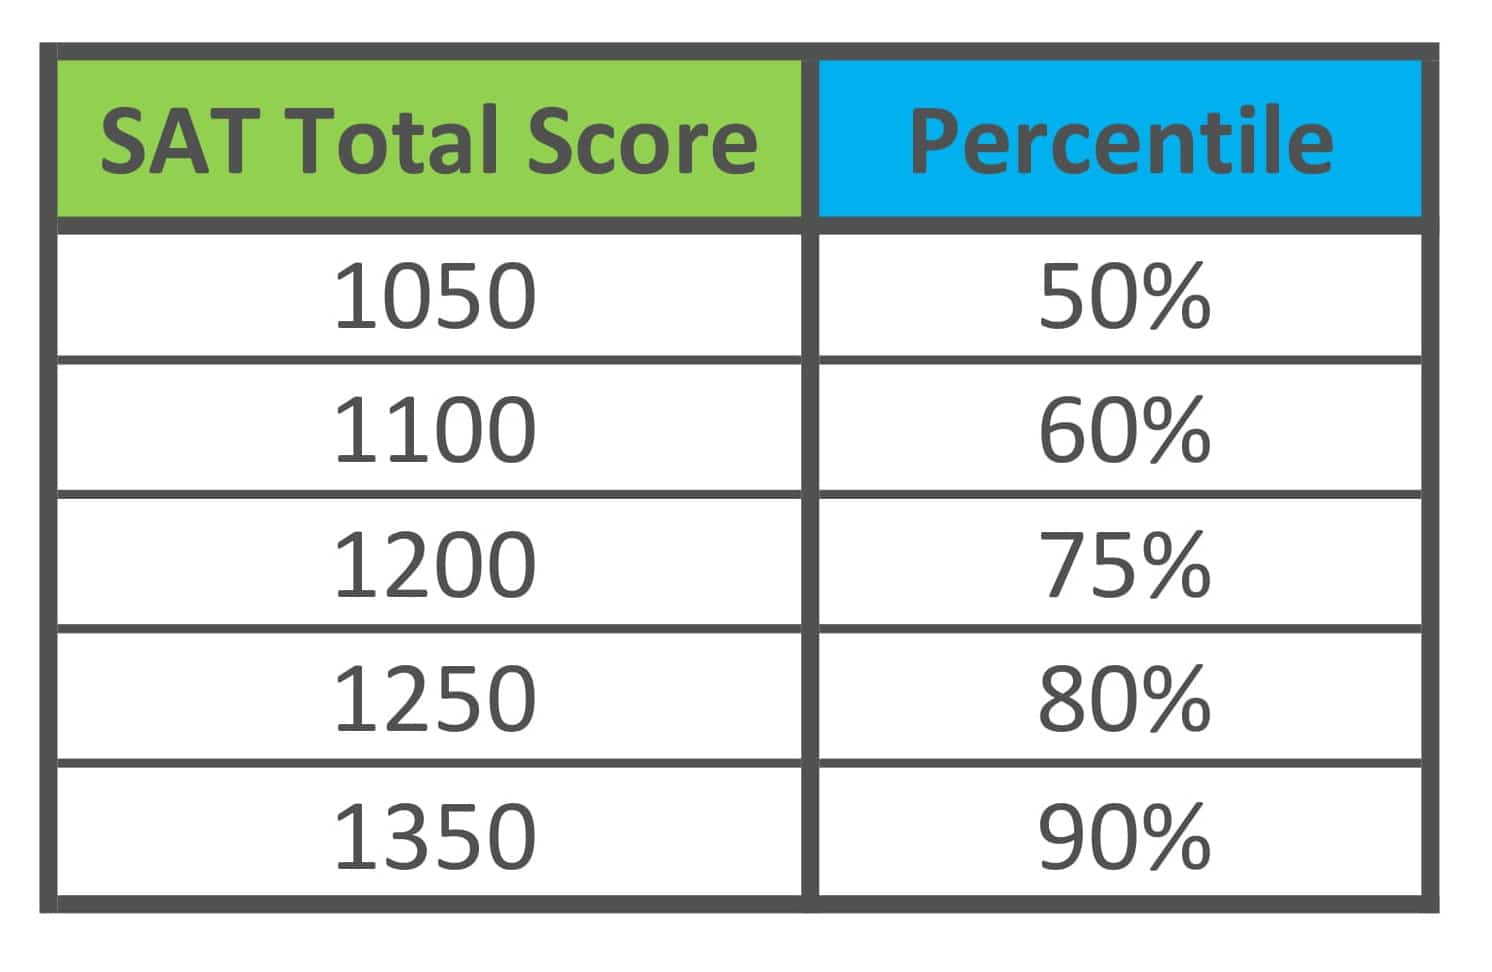 What is a good SAT score?